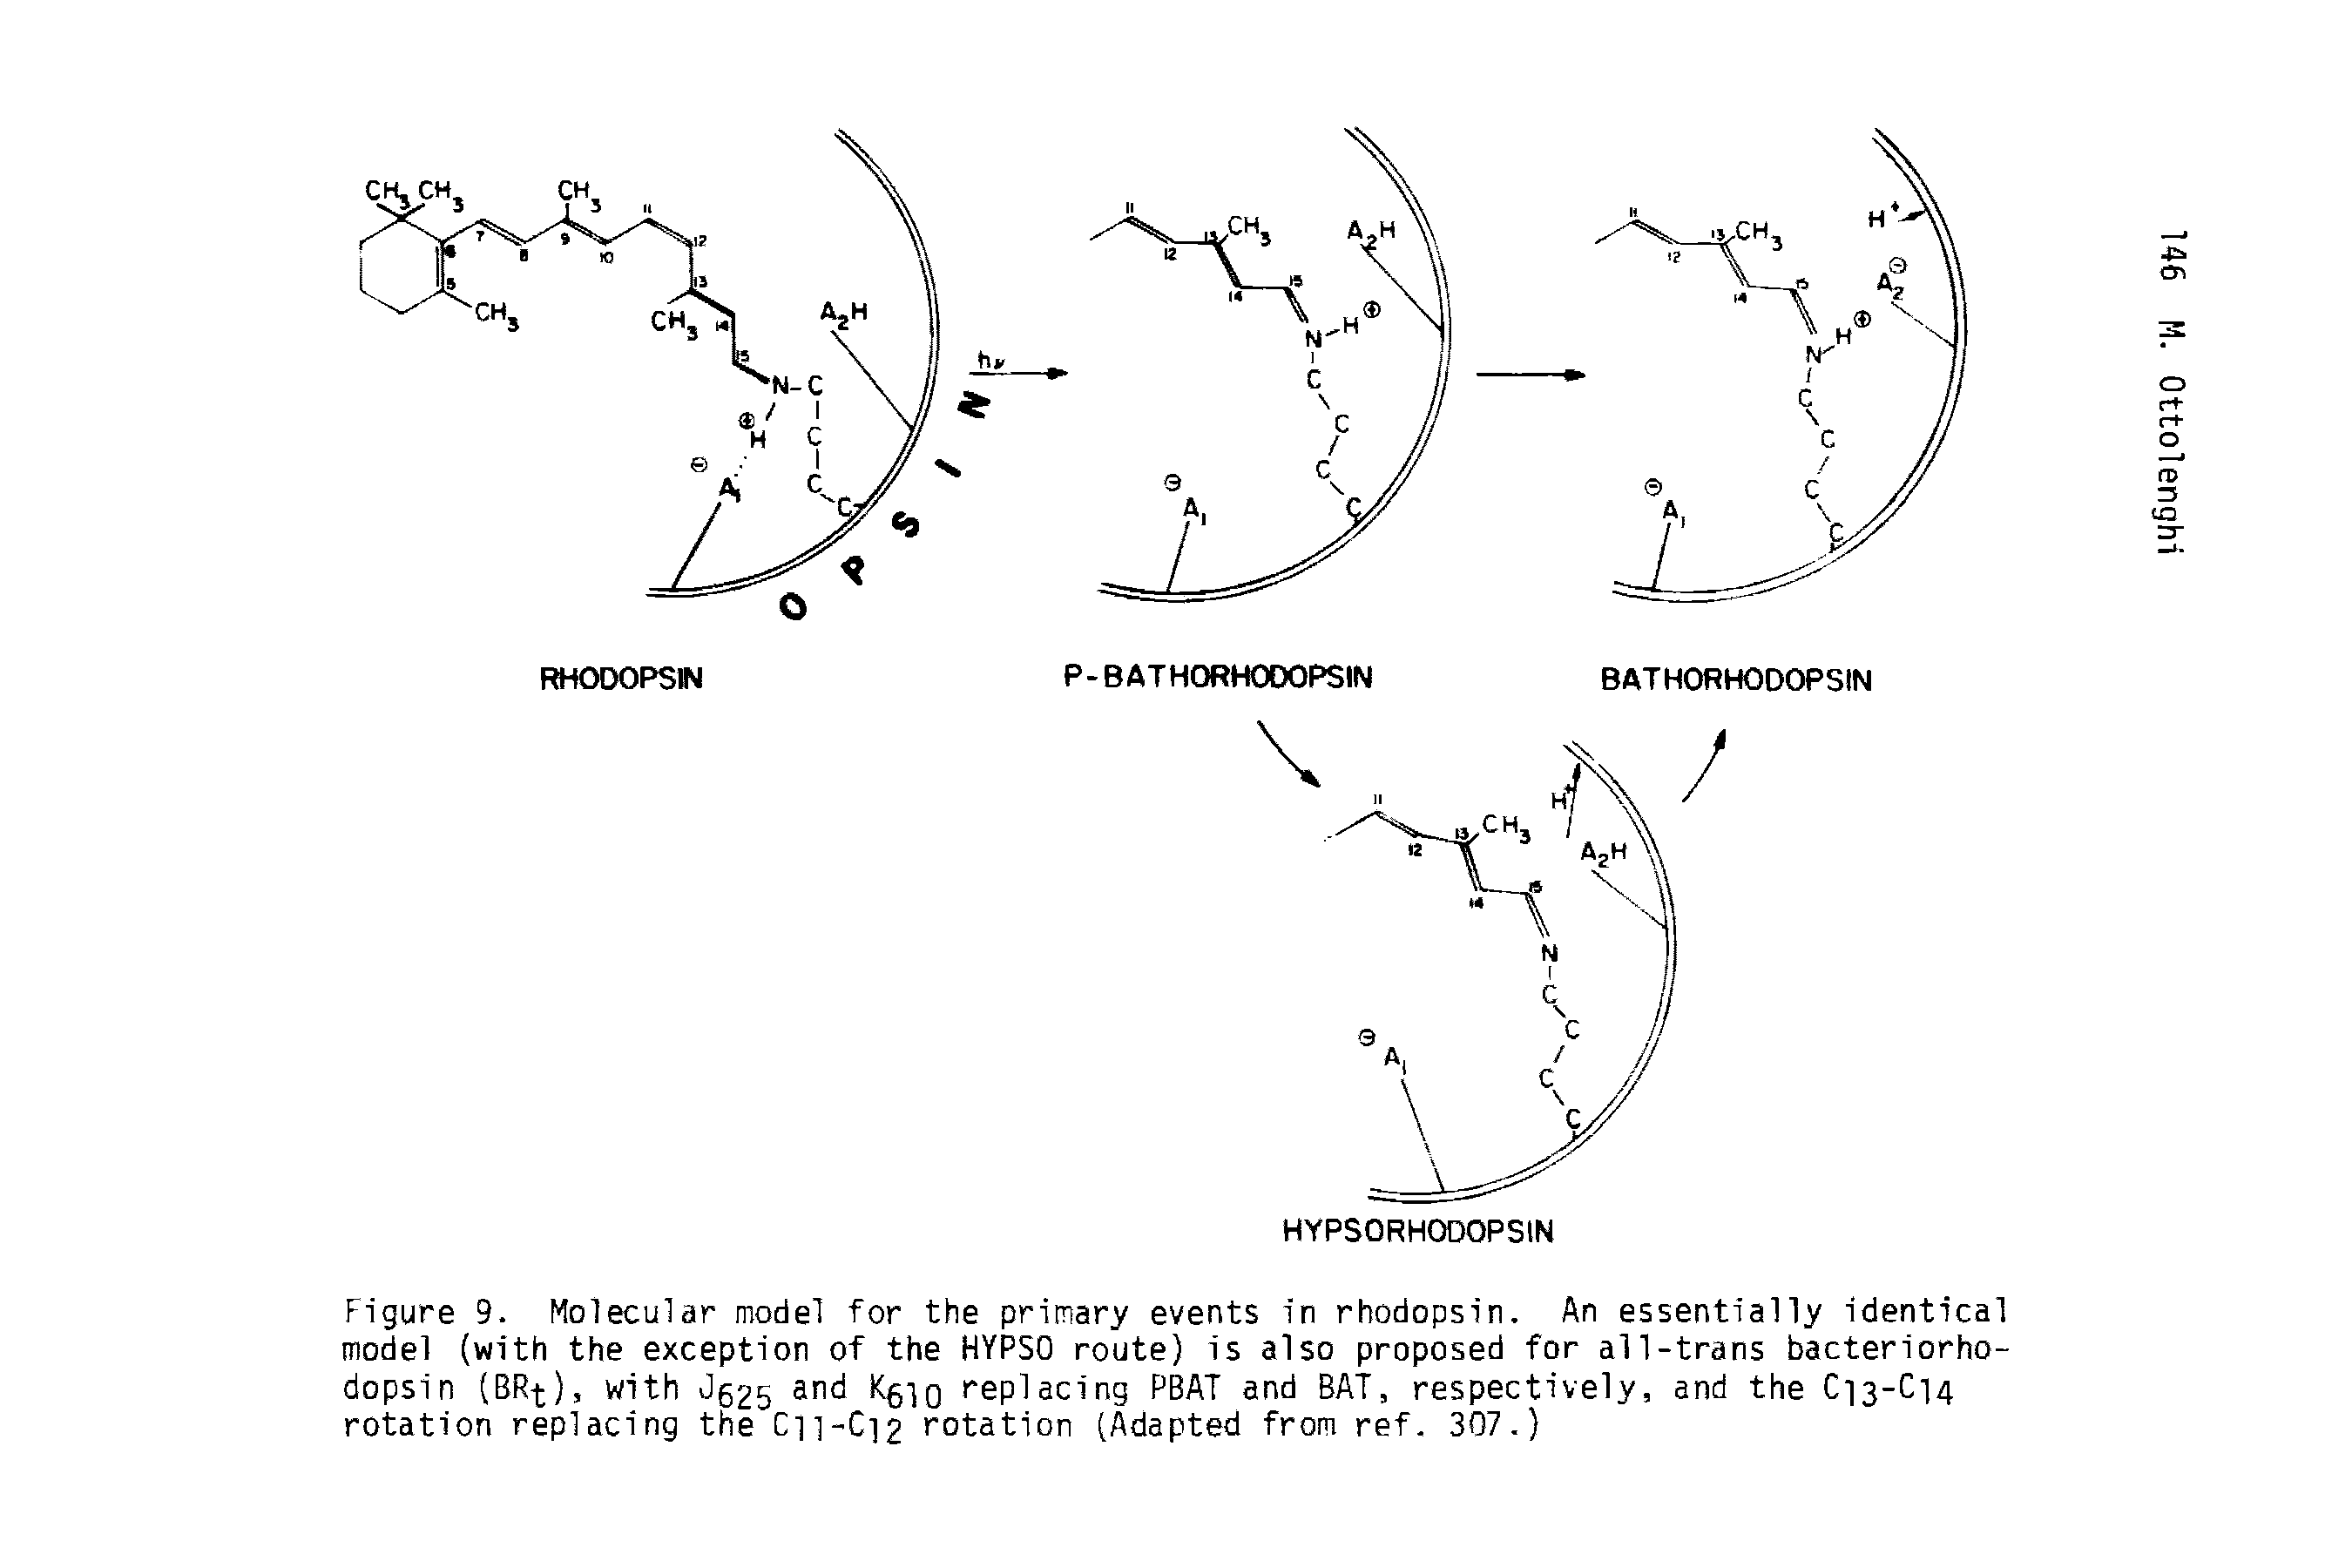 Figure 9. Molecular model for the primary events in rhodopsin. An essentially identical model (with the exception of the HYPSO route) is also proposed for all-trans bacteriorho-dopsin (BR-t), with anci Kfilo replacing PBAT and BAT, respectively, and the C13-C14 rotation replacing the Cn-Ci2 rotation (Adapted from ref. 307.)...